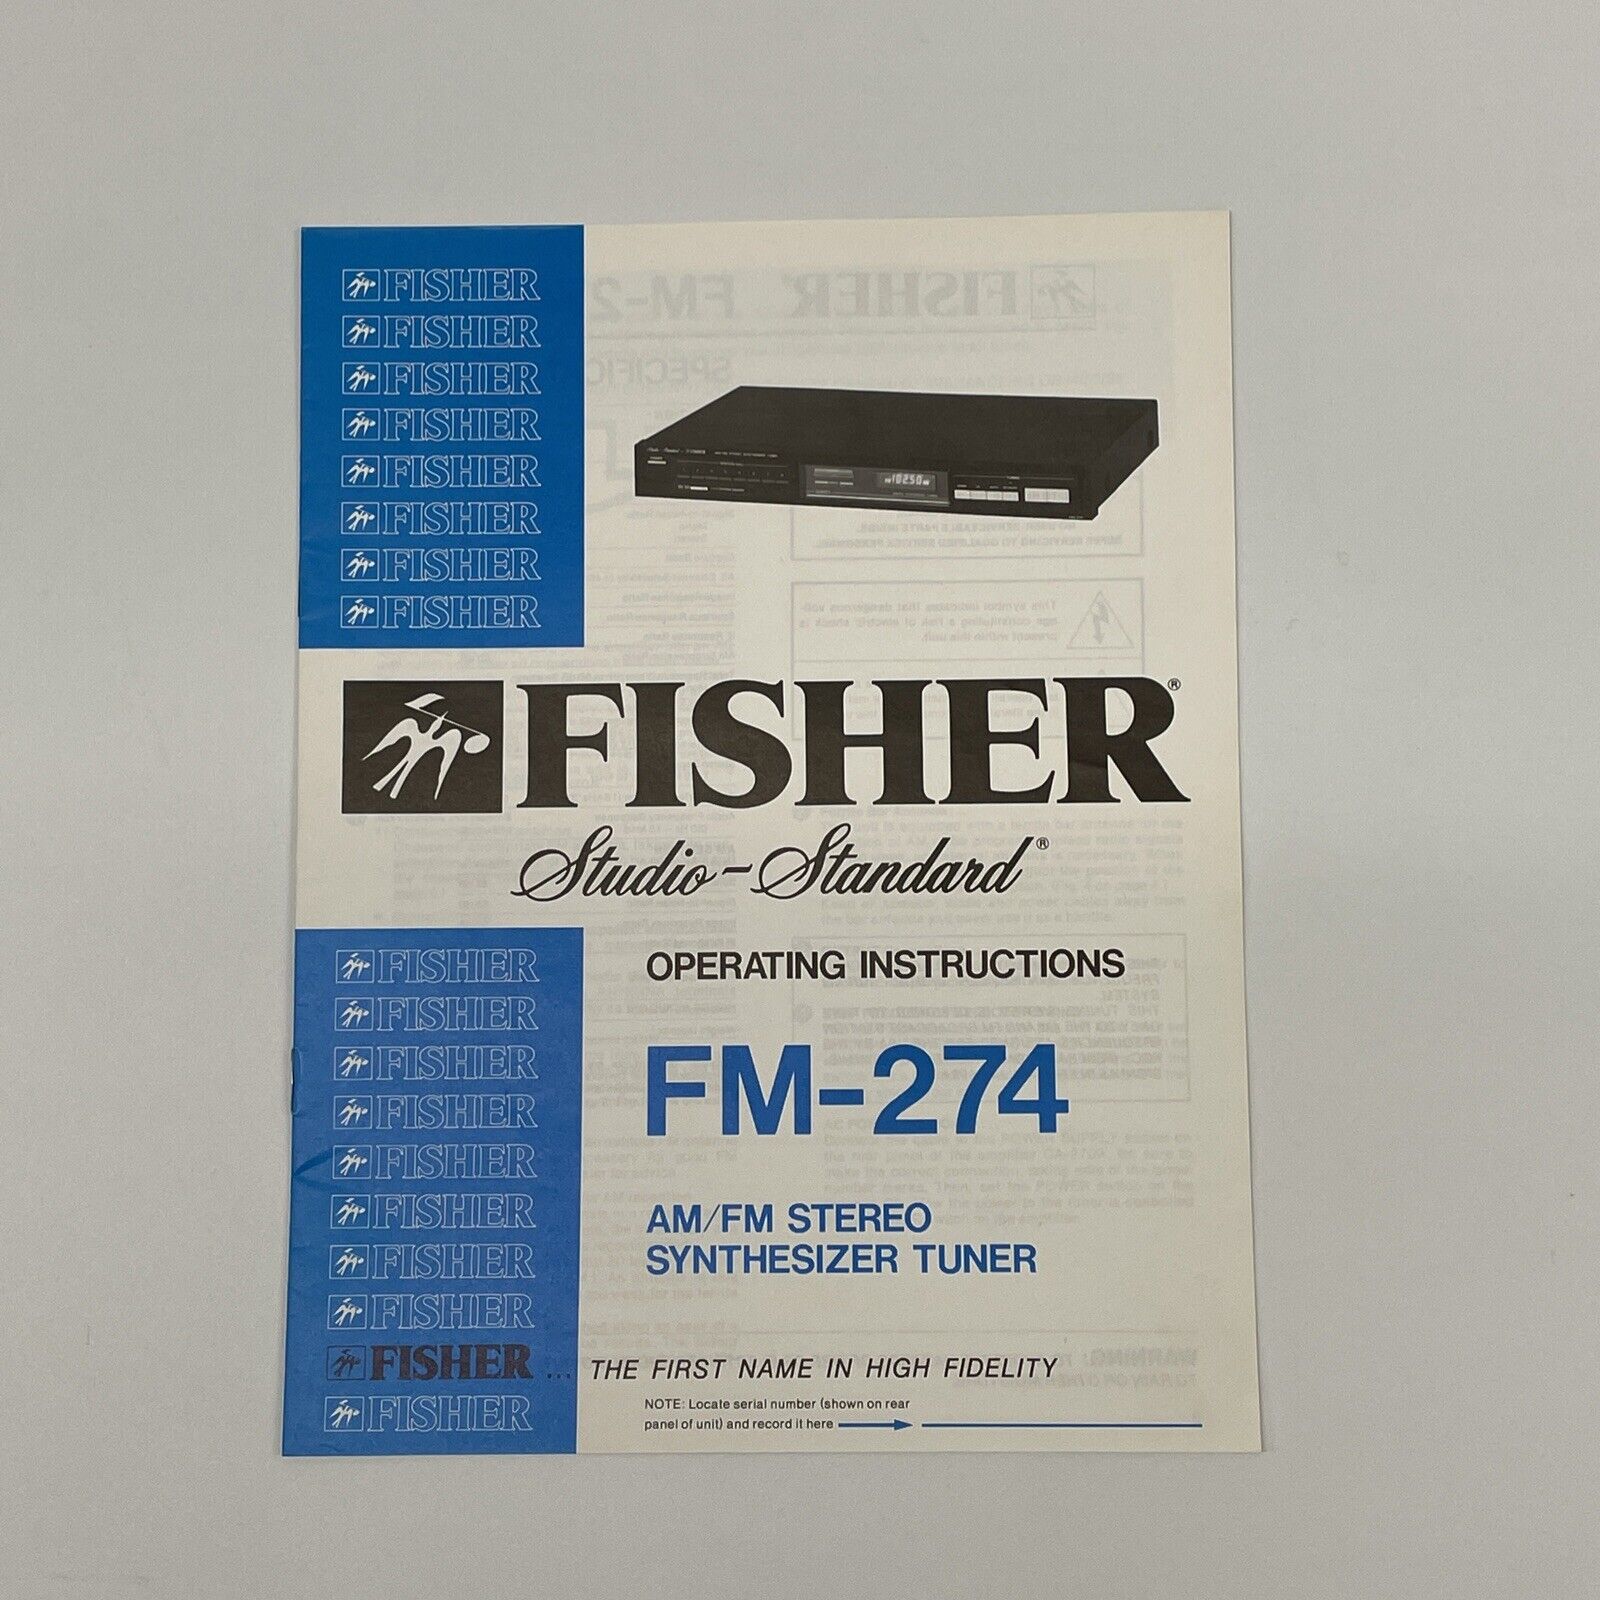 Fisher MT-750 AM/FM Stereo Synthesizer Tuner Operating Manual